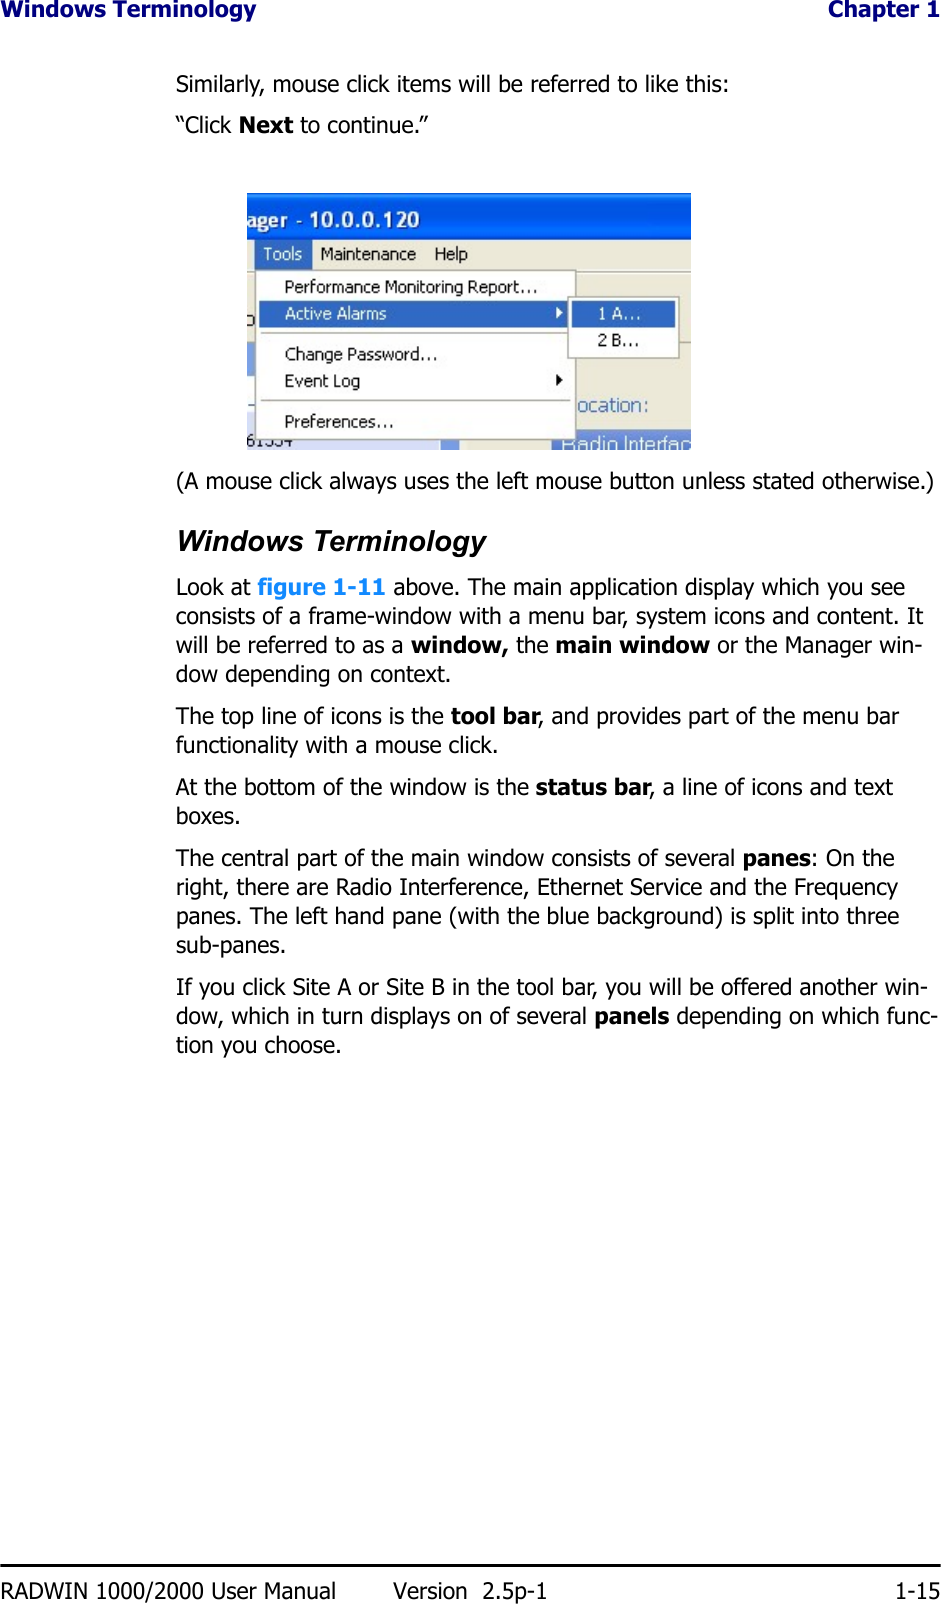 Windows Terminology  Chapter 1RADWIN 1000/2000 User Manual Version  2.5p-1 1-15Similarly, mouse click items will be referred to like this:“Click Next to continue.”(A mouse click always uses the left mouse button unless stated otherwise.)Windows TerminologyLook at figure 1-11 above. The main application display which you see consists of a frame-window with a menu bar, system icons and content. It will be referred to as a window, the main window or the Manager win-dow depending on context.The top line of icons is the tool bar, and provides part of the menu bar functionality with a mouse click.At the bottom of the window is the status bar, a line of icons and text boxes.The central part of the main window consists of several panes: On the right, there are Radio Interference, Ethernet Service and the Frequency panes. The left hand pane (with the blue background) is split into three sub-panes.If you click Site A or Site B in the tool bar, you will be offered another win-dow, which in turn displays on of several panels depending on which func-tion you choose.